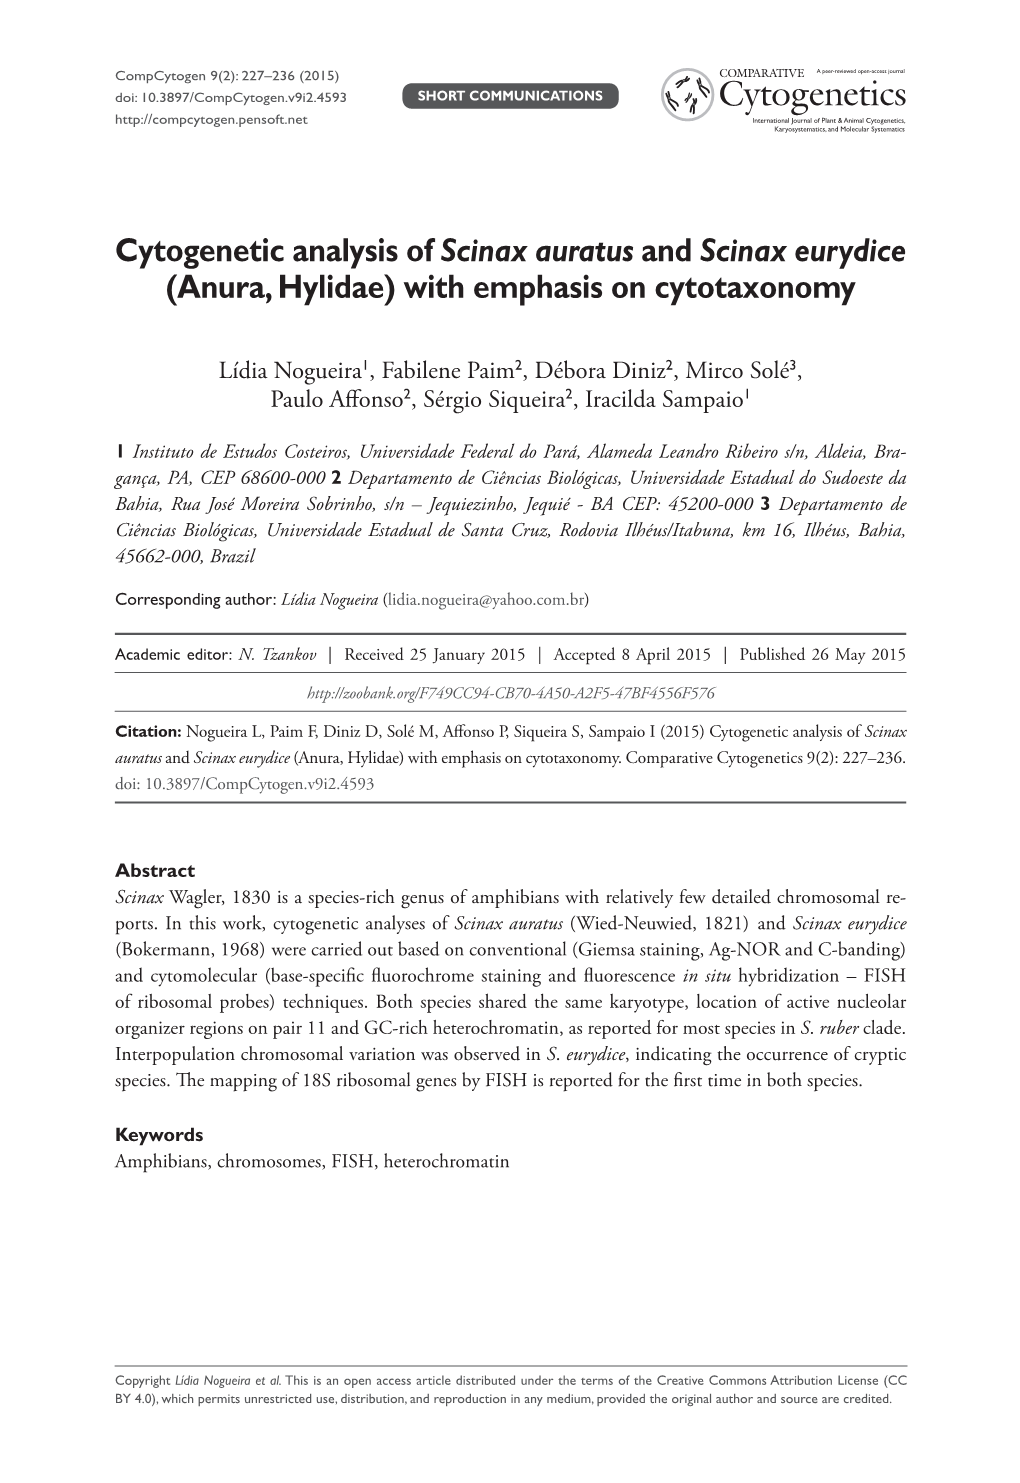 Cytogenetic Analysis of Scinax Auratus and Scinax Eurydice (Anura, Hylidae) with Emphasis on Cytotaxonomy